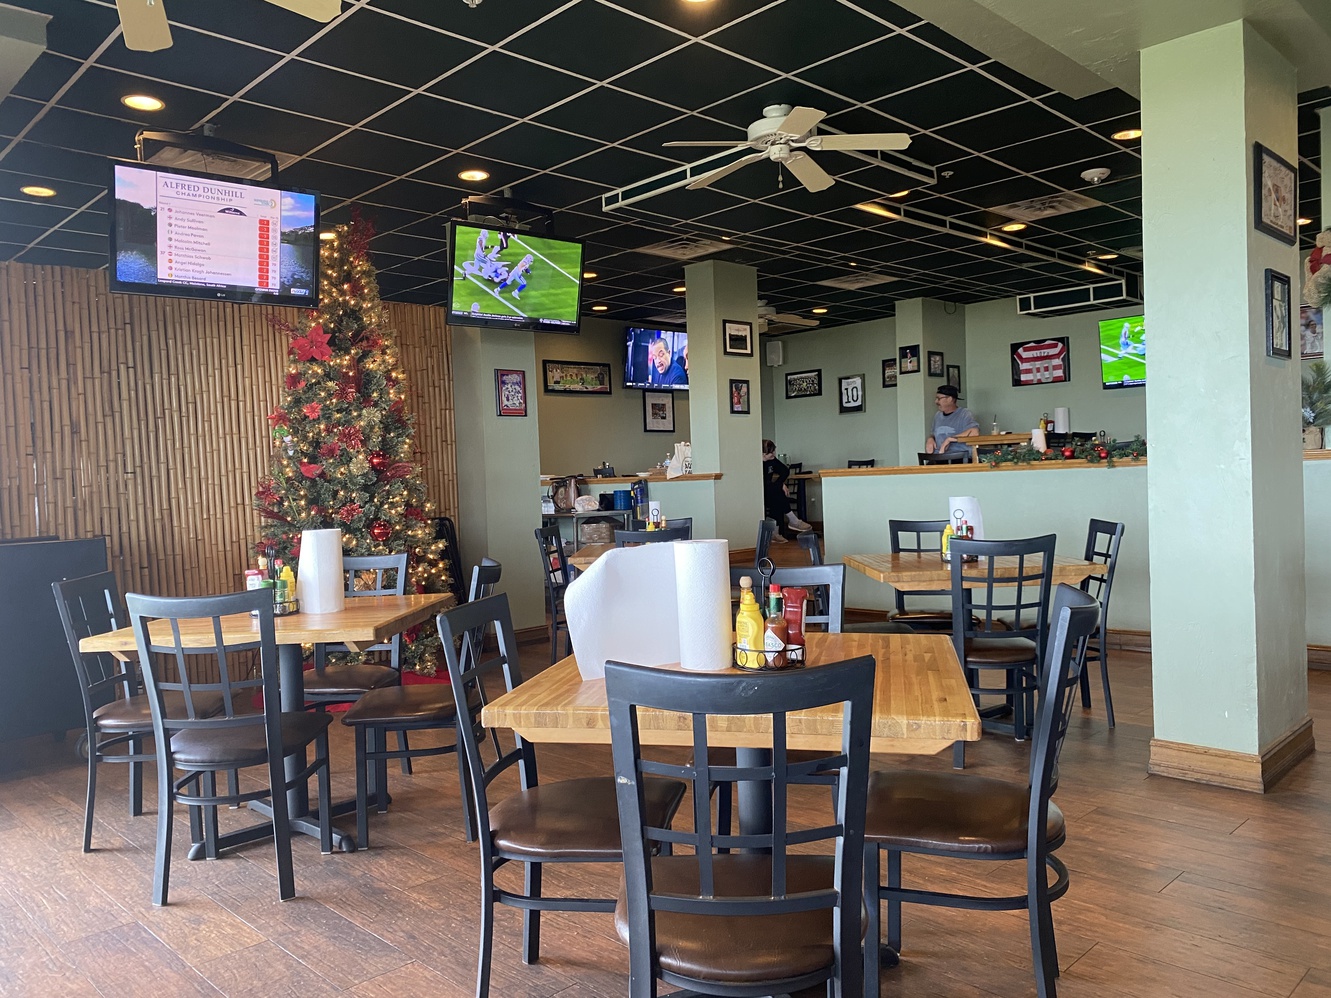 Sunset Grille is nicely decorated for Christmas.